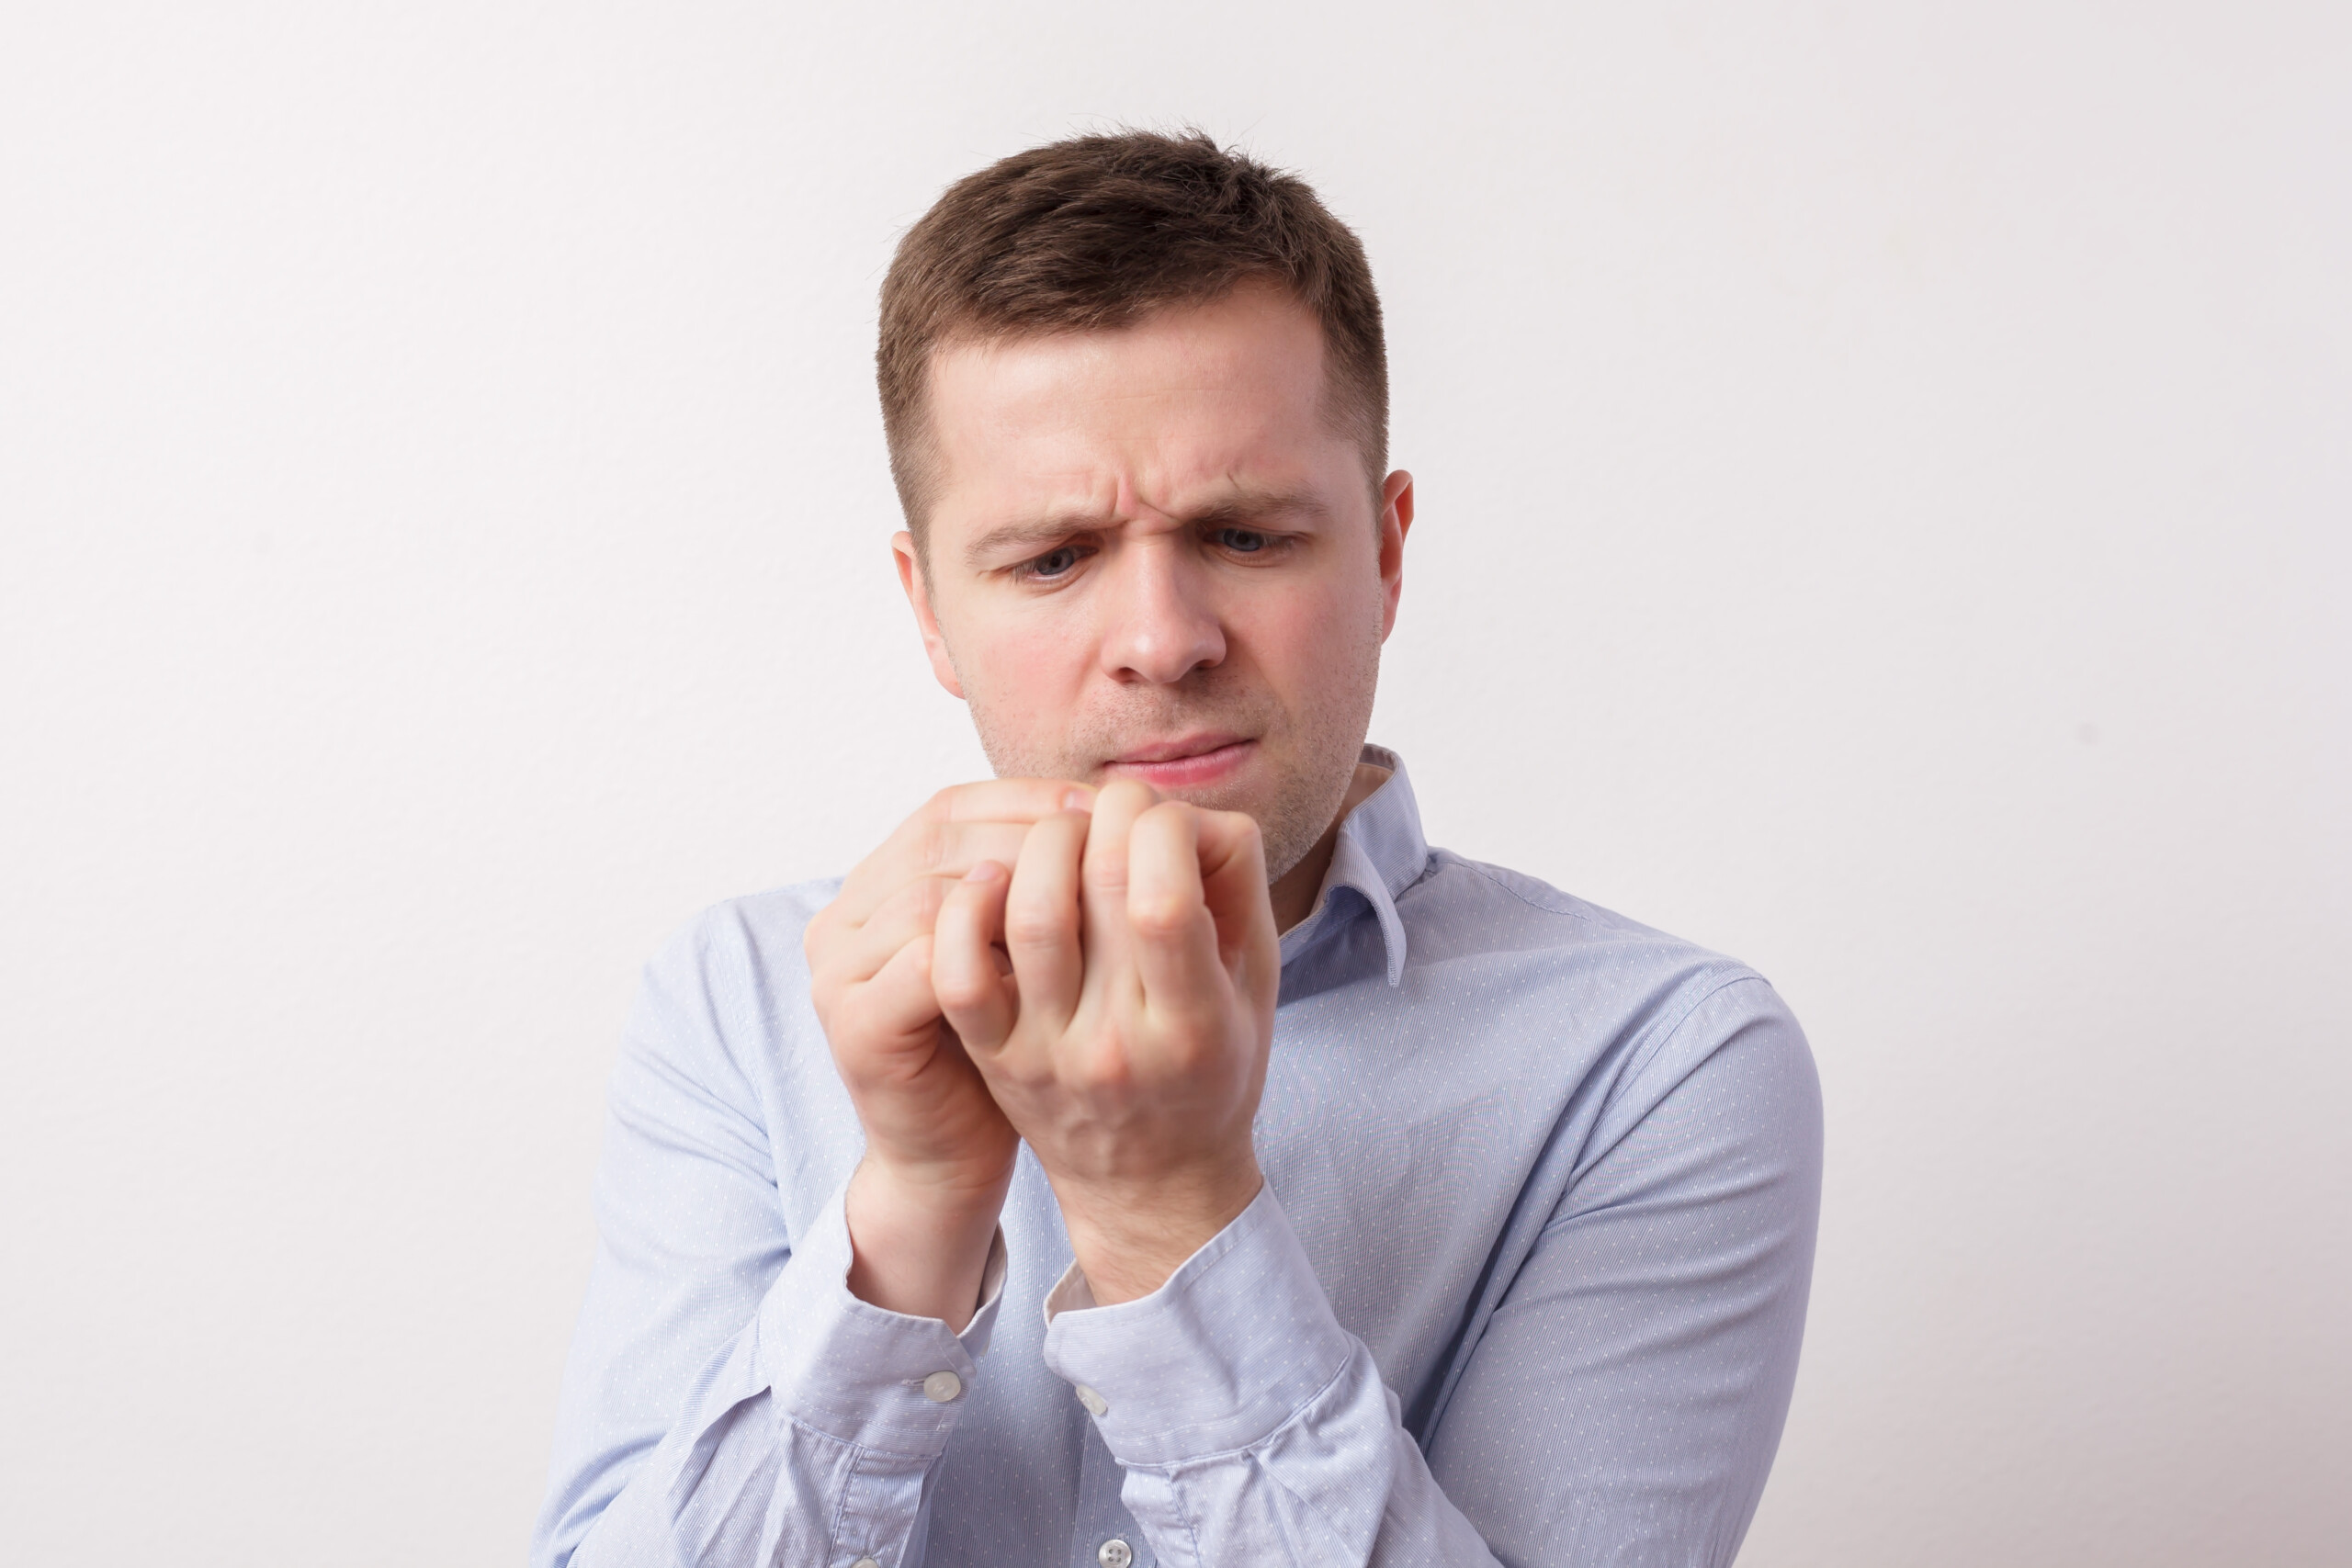 Why Do Some Autistic People Smell Their Fingers?